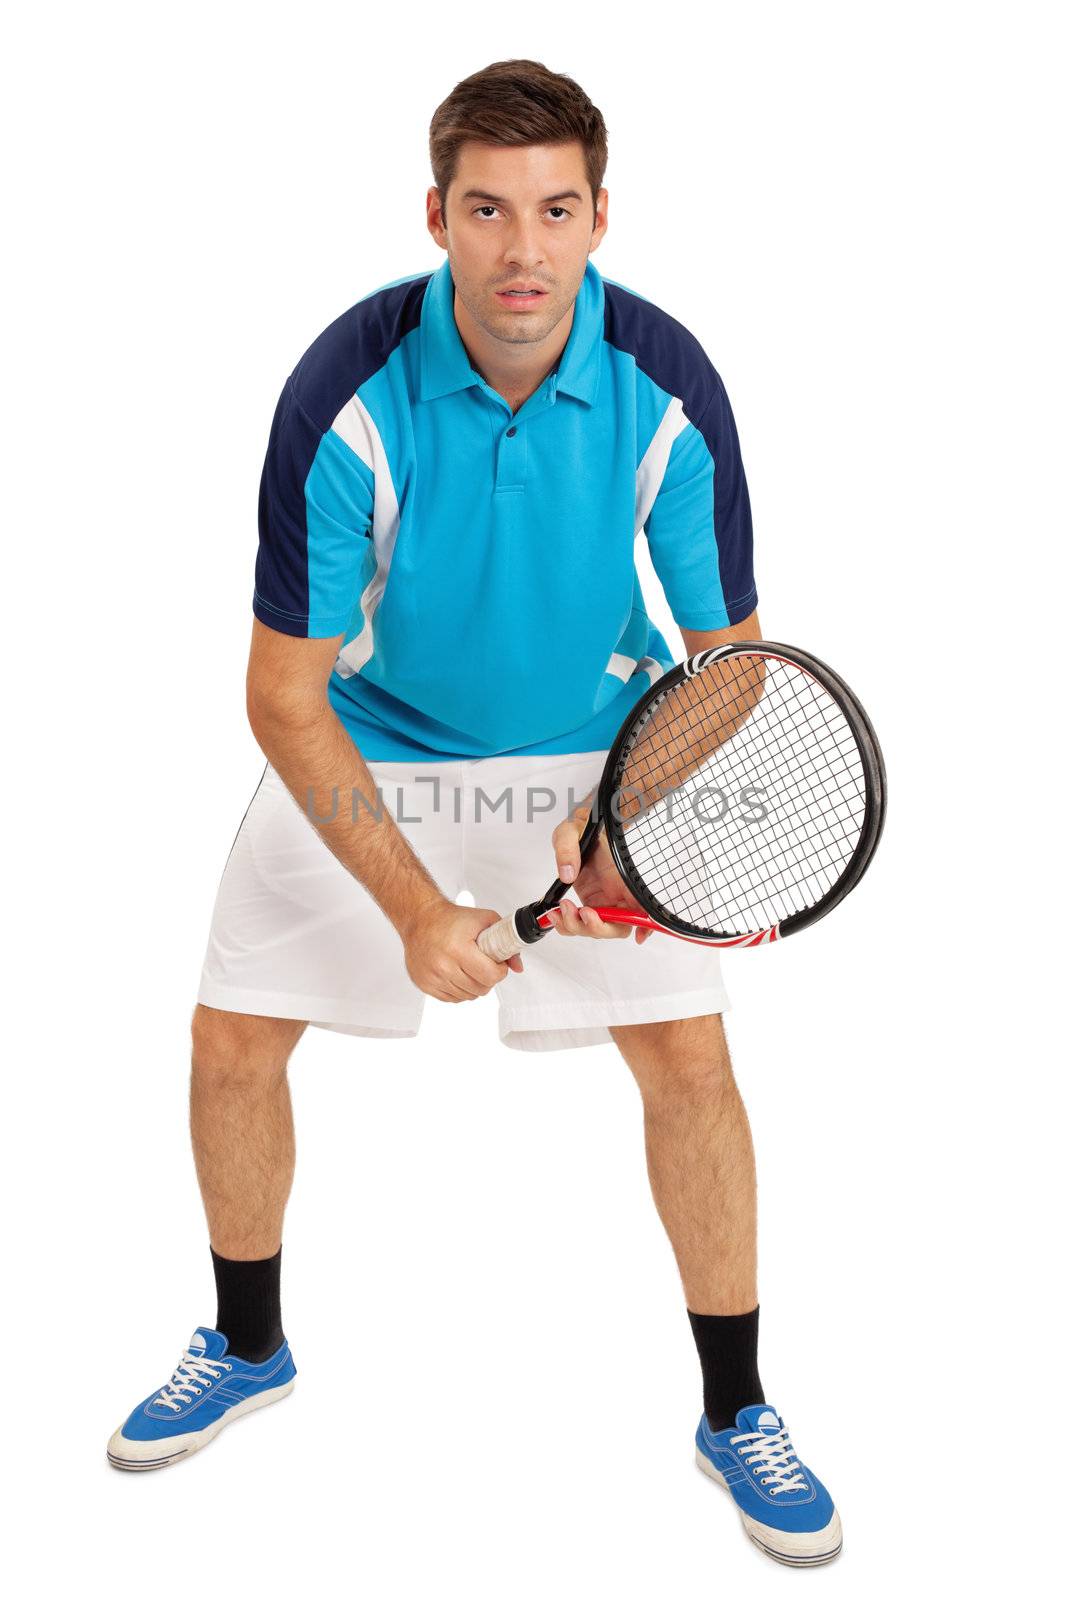 Photo of a young man playing tennis over white background.